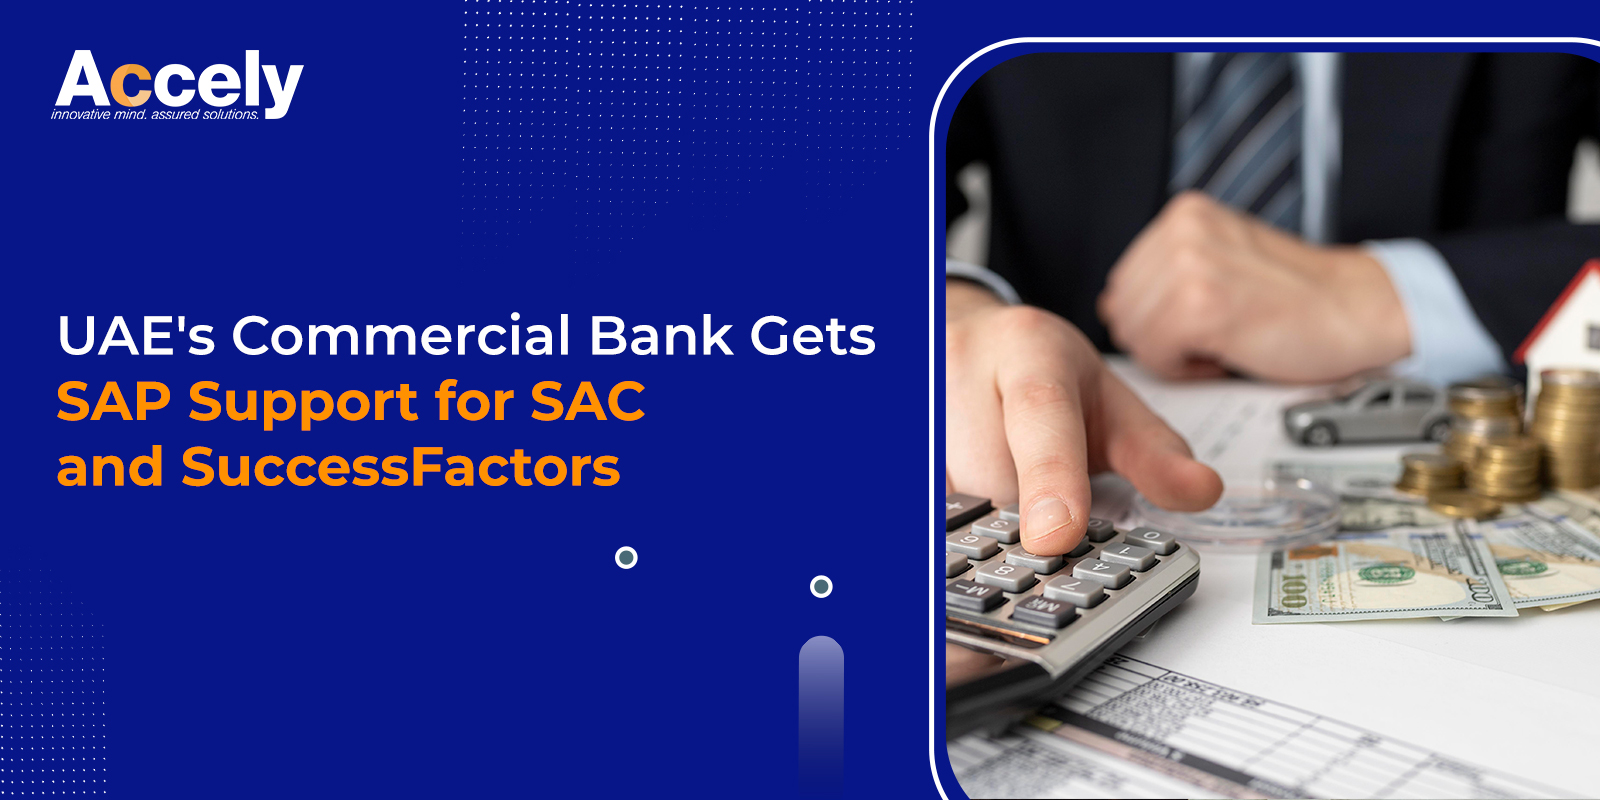 UAE's Commercial Bank Gets SAP Support for SAC and SuccessFactors